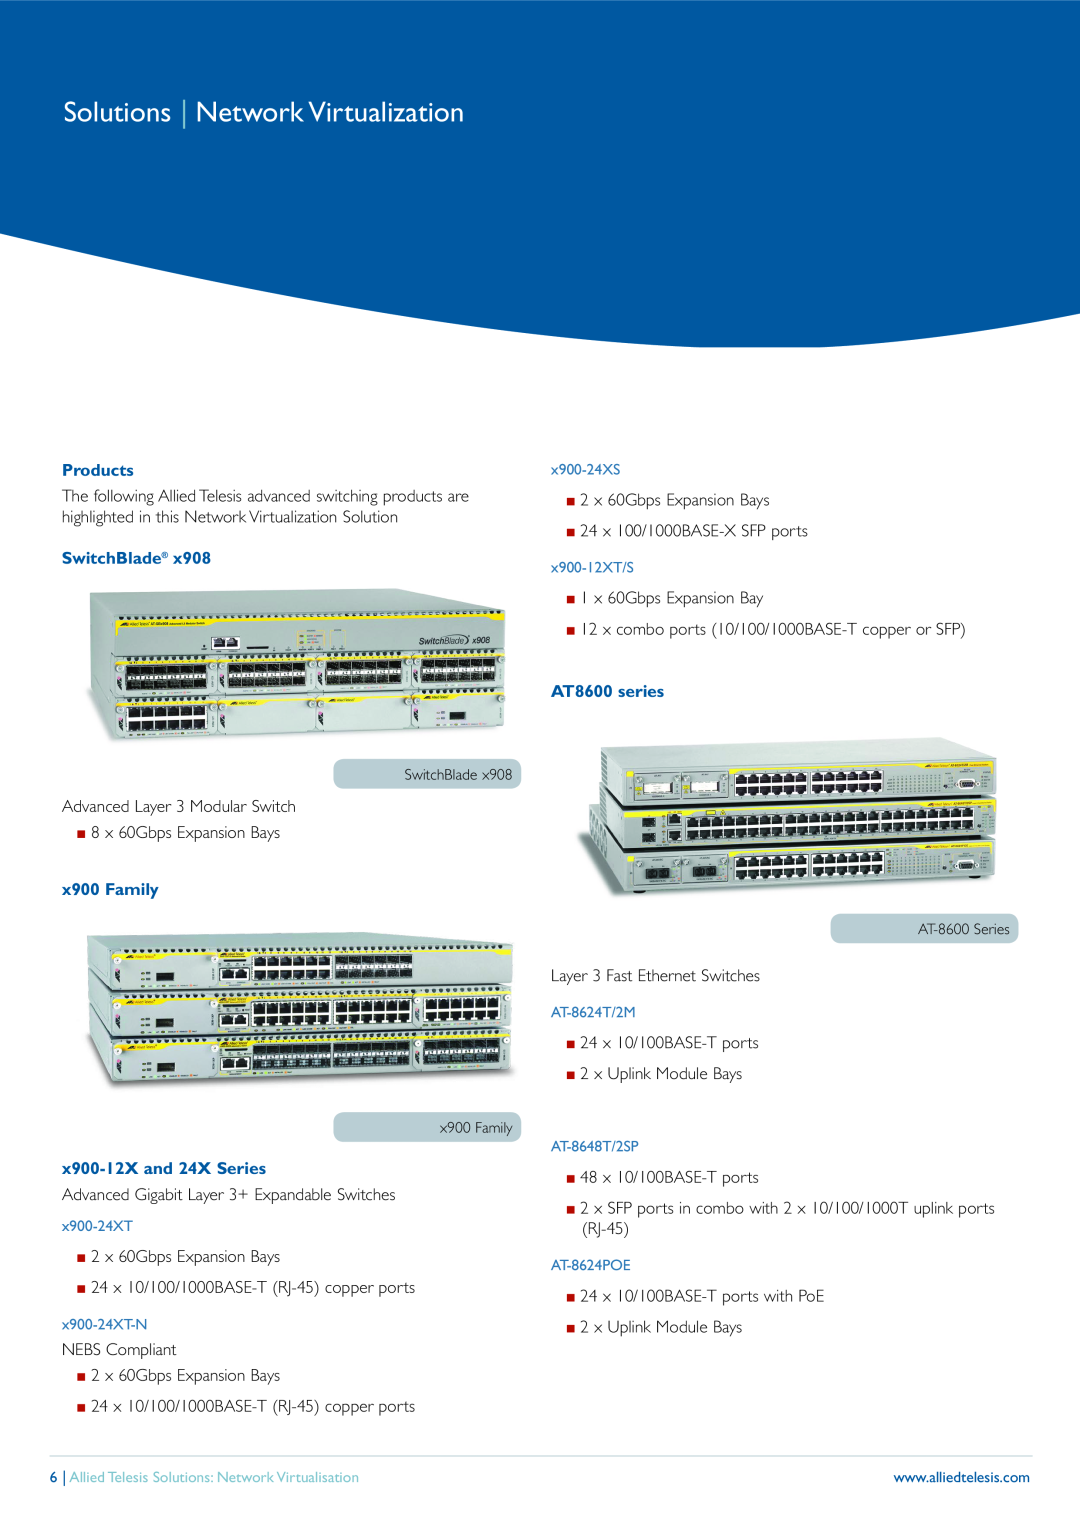 Allied Telesis x908 manual Solutions Network Virtualization, Products, SwitchBlade, x900 Family, x900-12X and 24X Series 